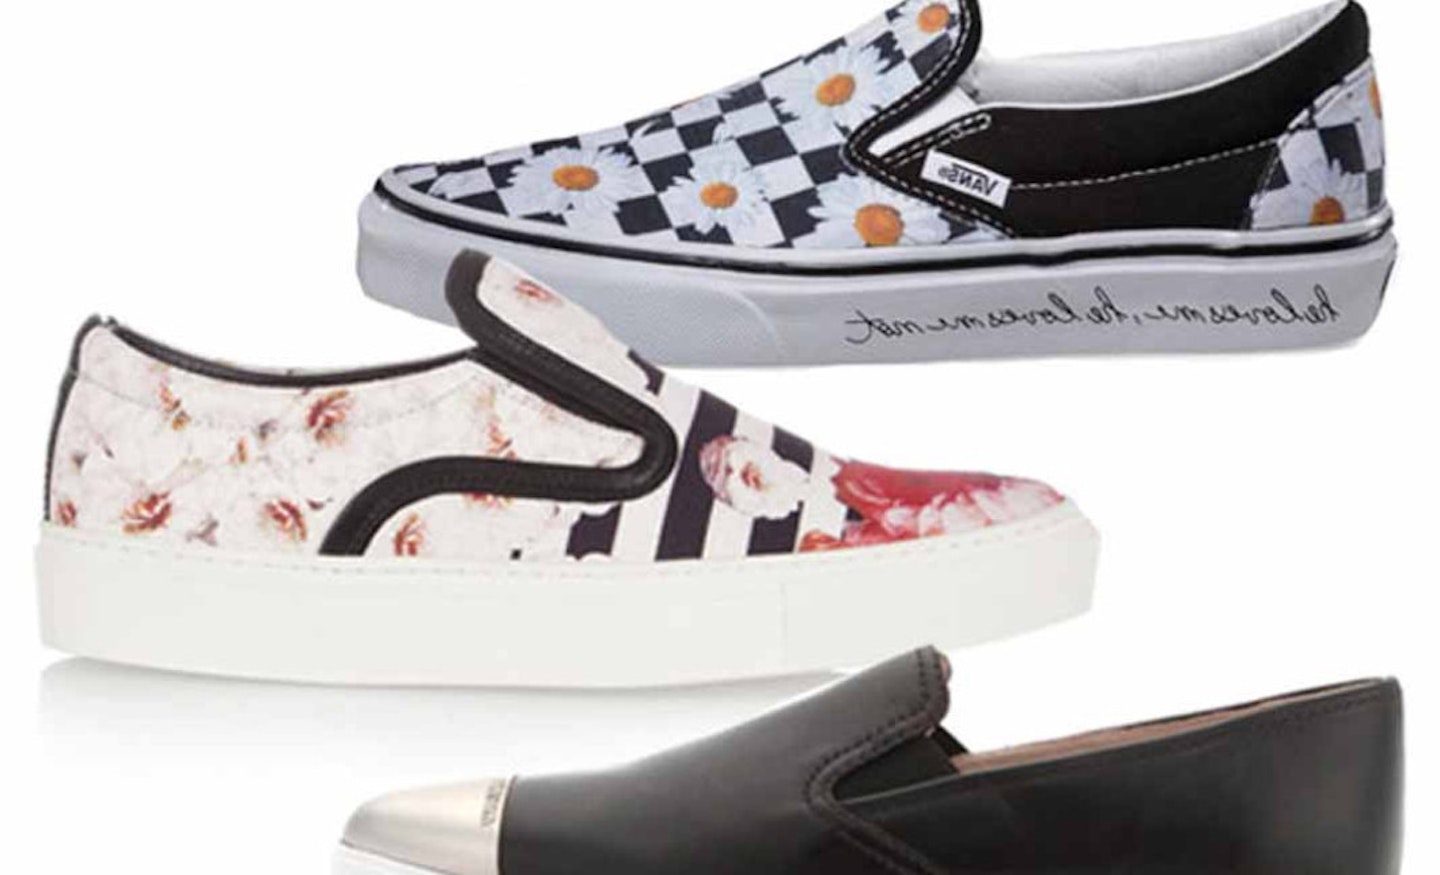 GALLERY >> Top 30 Skater Shoes